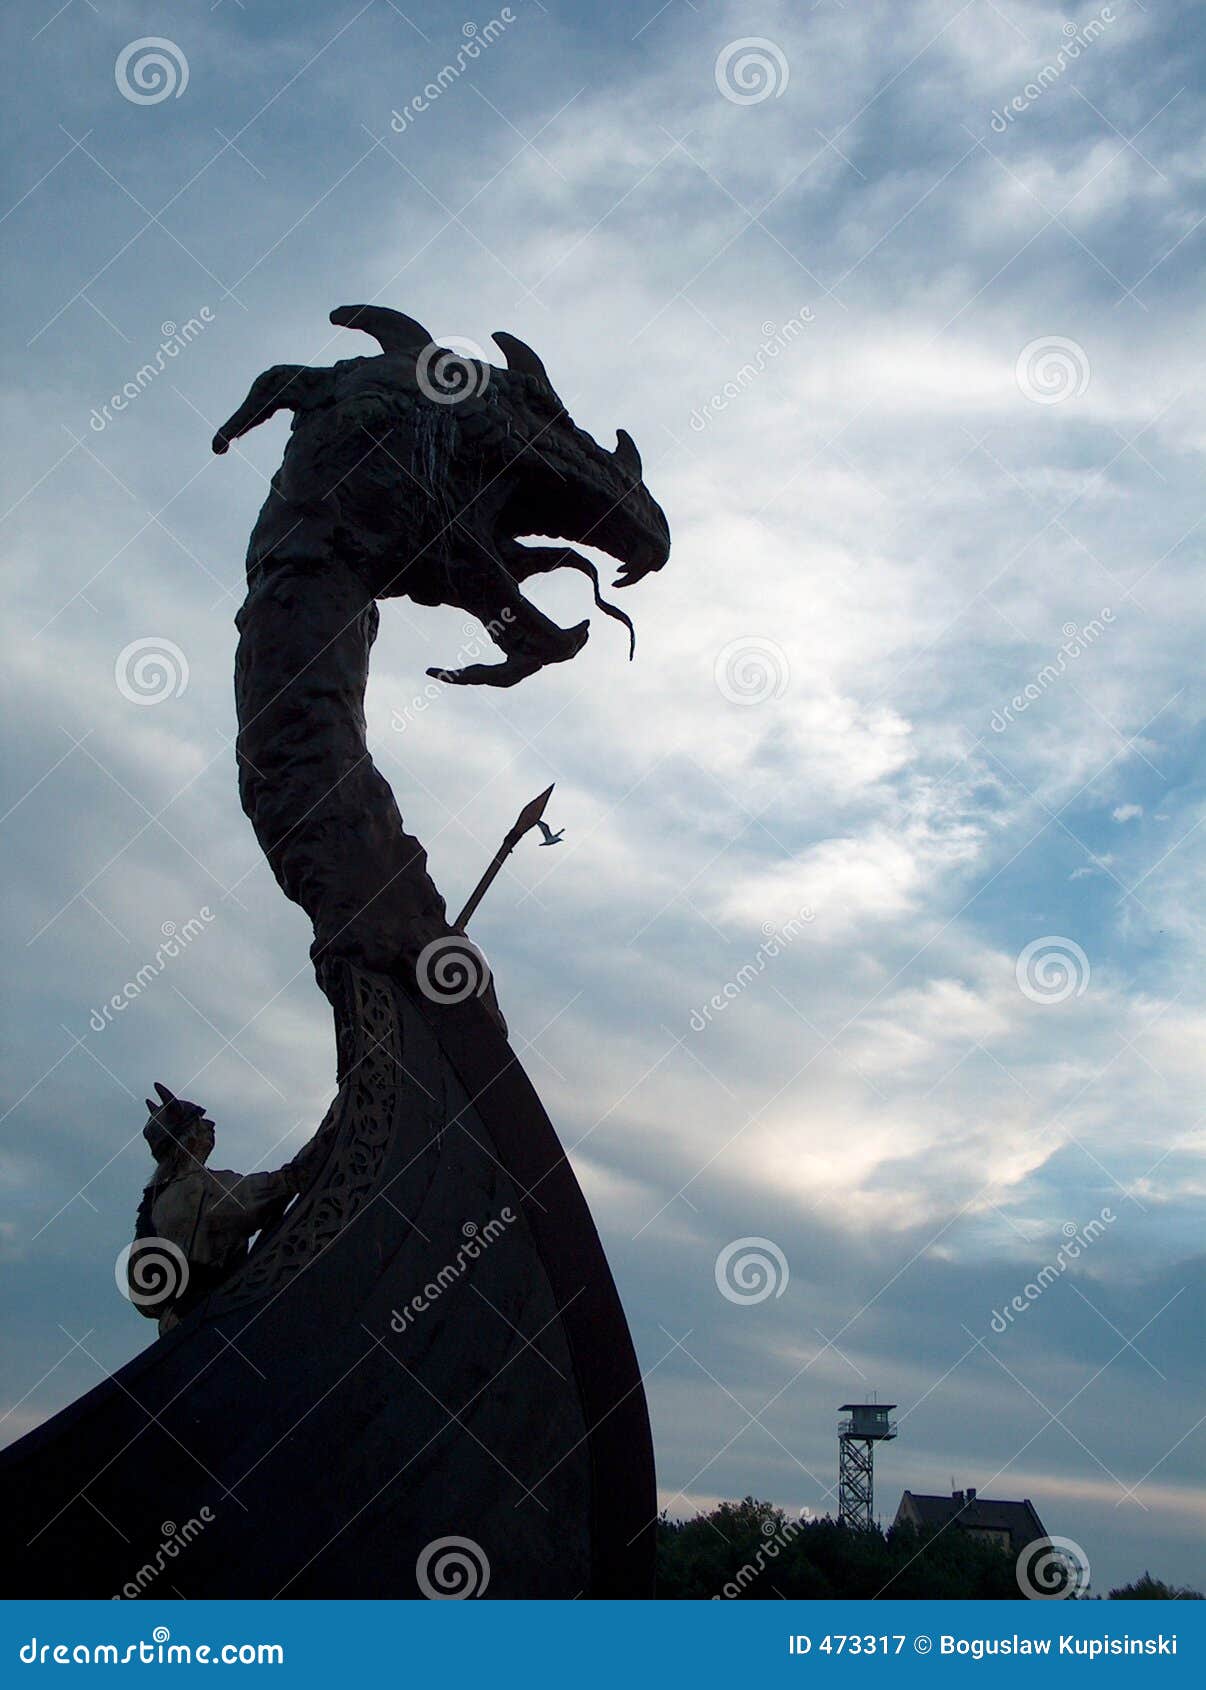 Viking's Dragon On The Boat Royalty Free Stock Photography - Image 